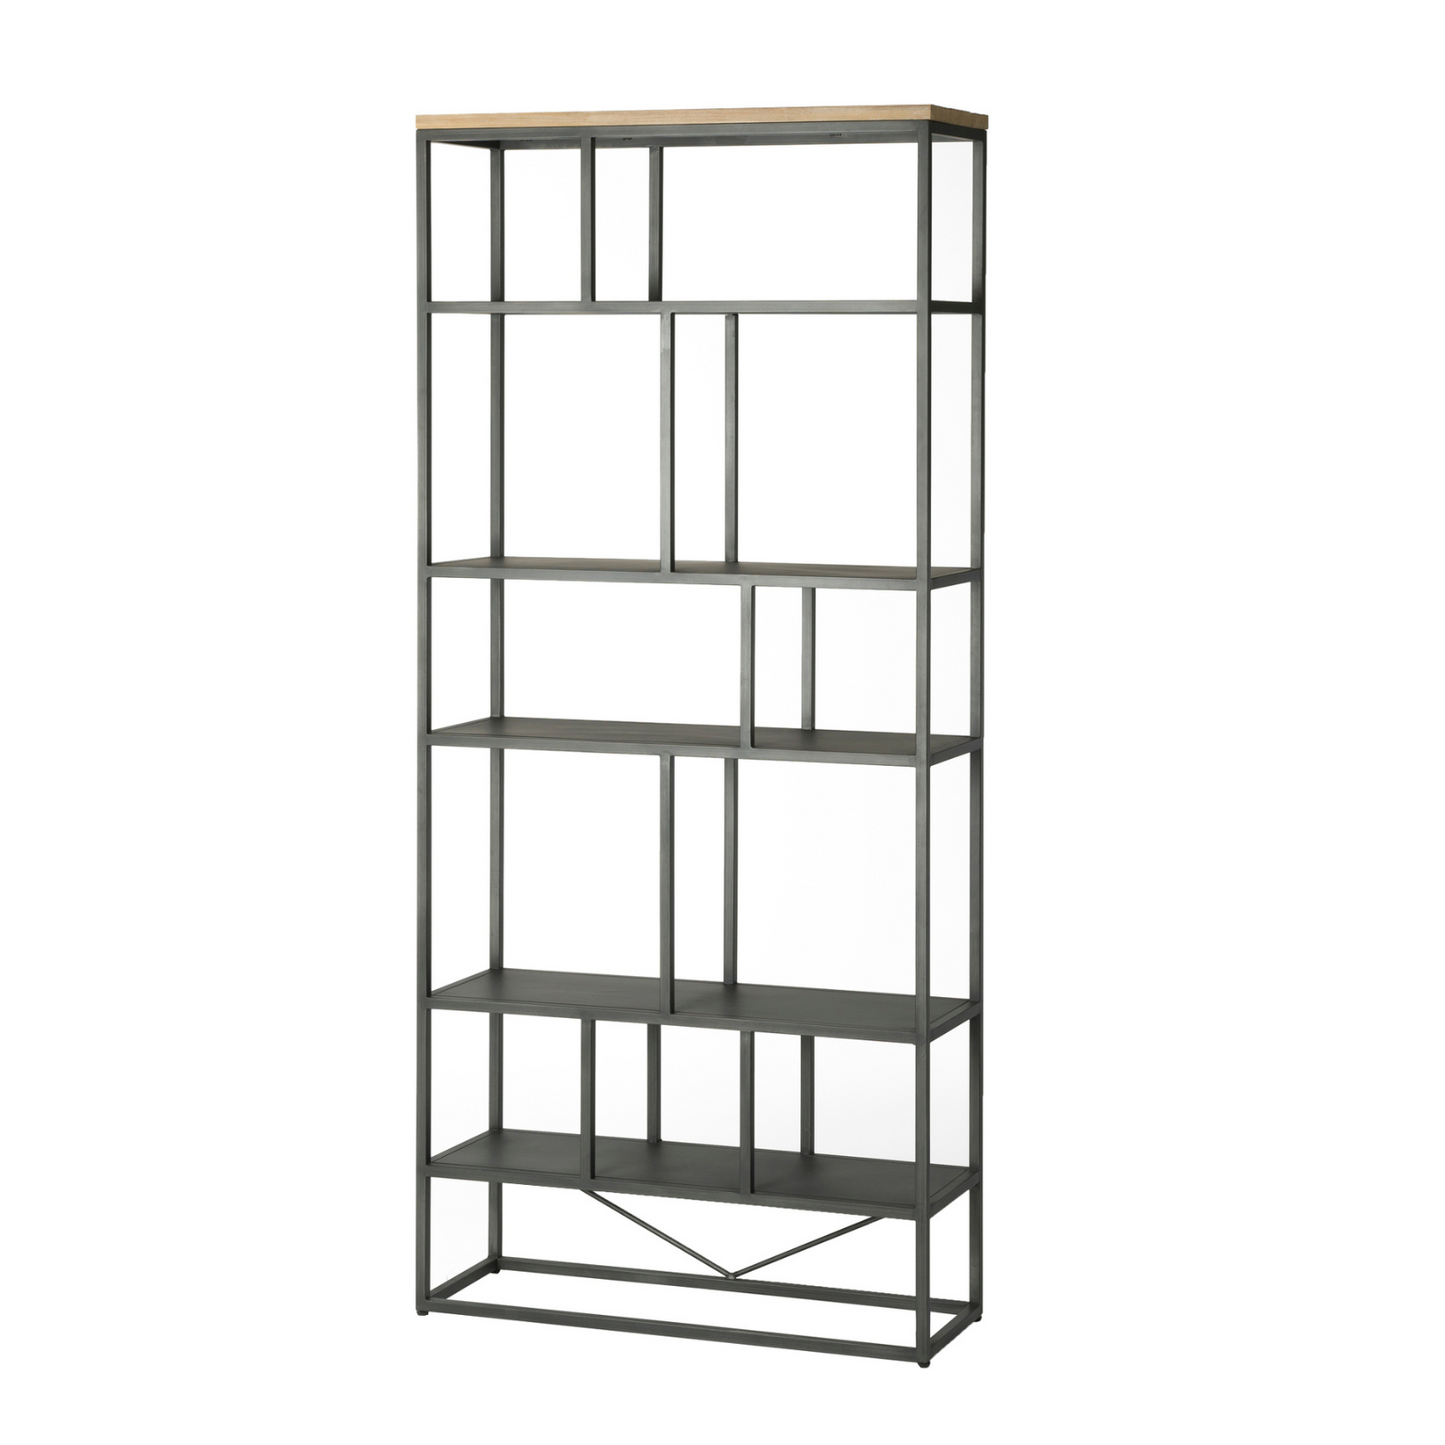 "Introduce the Havana Tall Bookcase - handcrafted from Acacia wood and sturdy iron. Modern farmhouse design with ample storage and striking display area. Clean lines, mixed textures, vibrant colors. Fun, functional element for your decor."